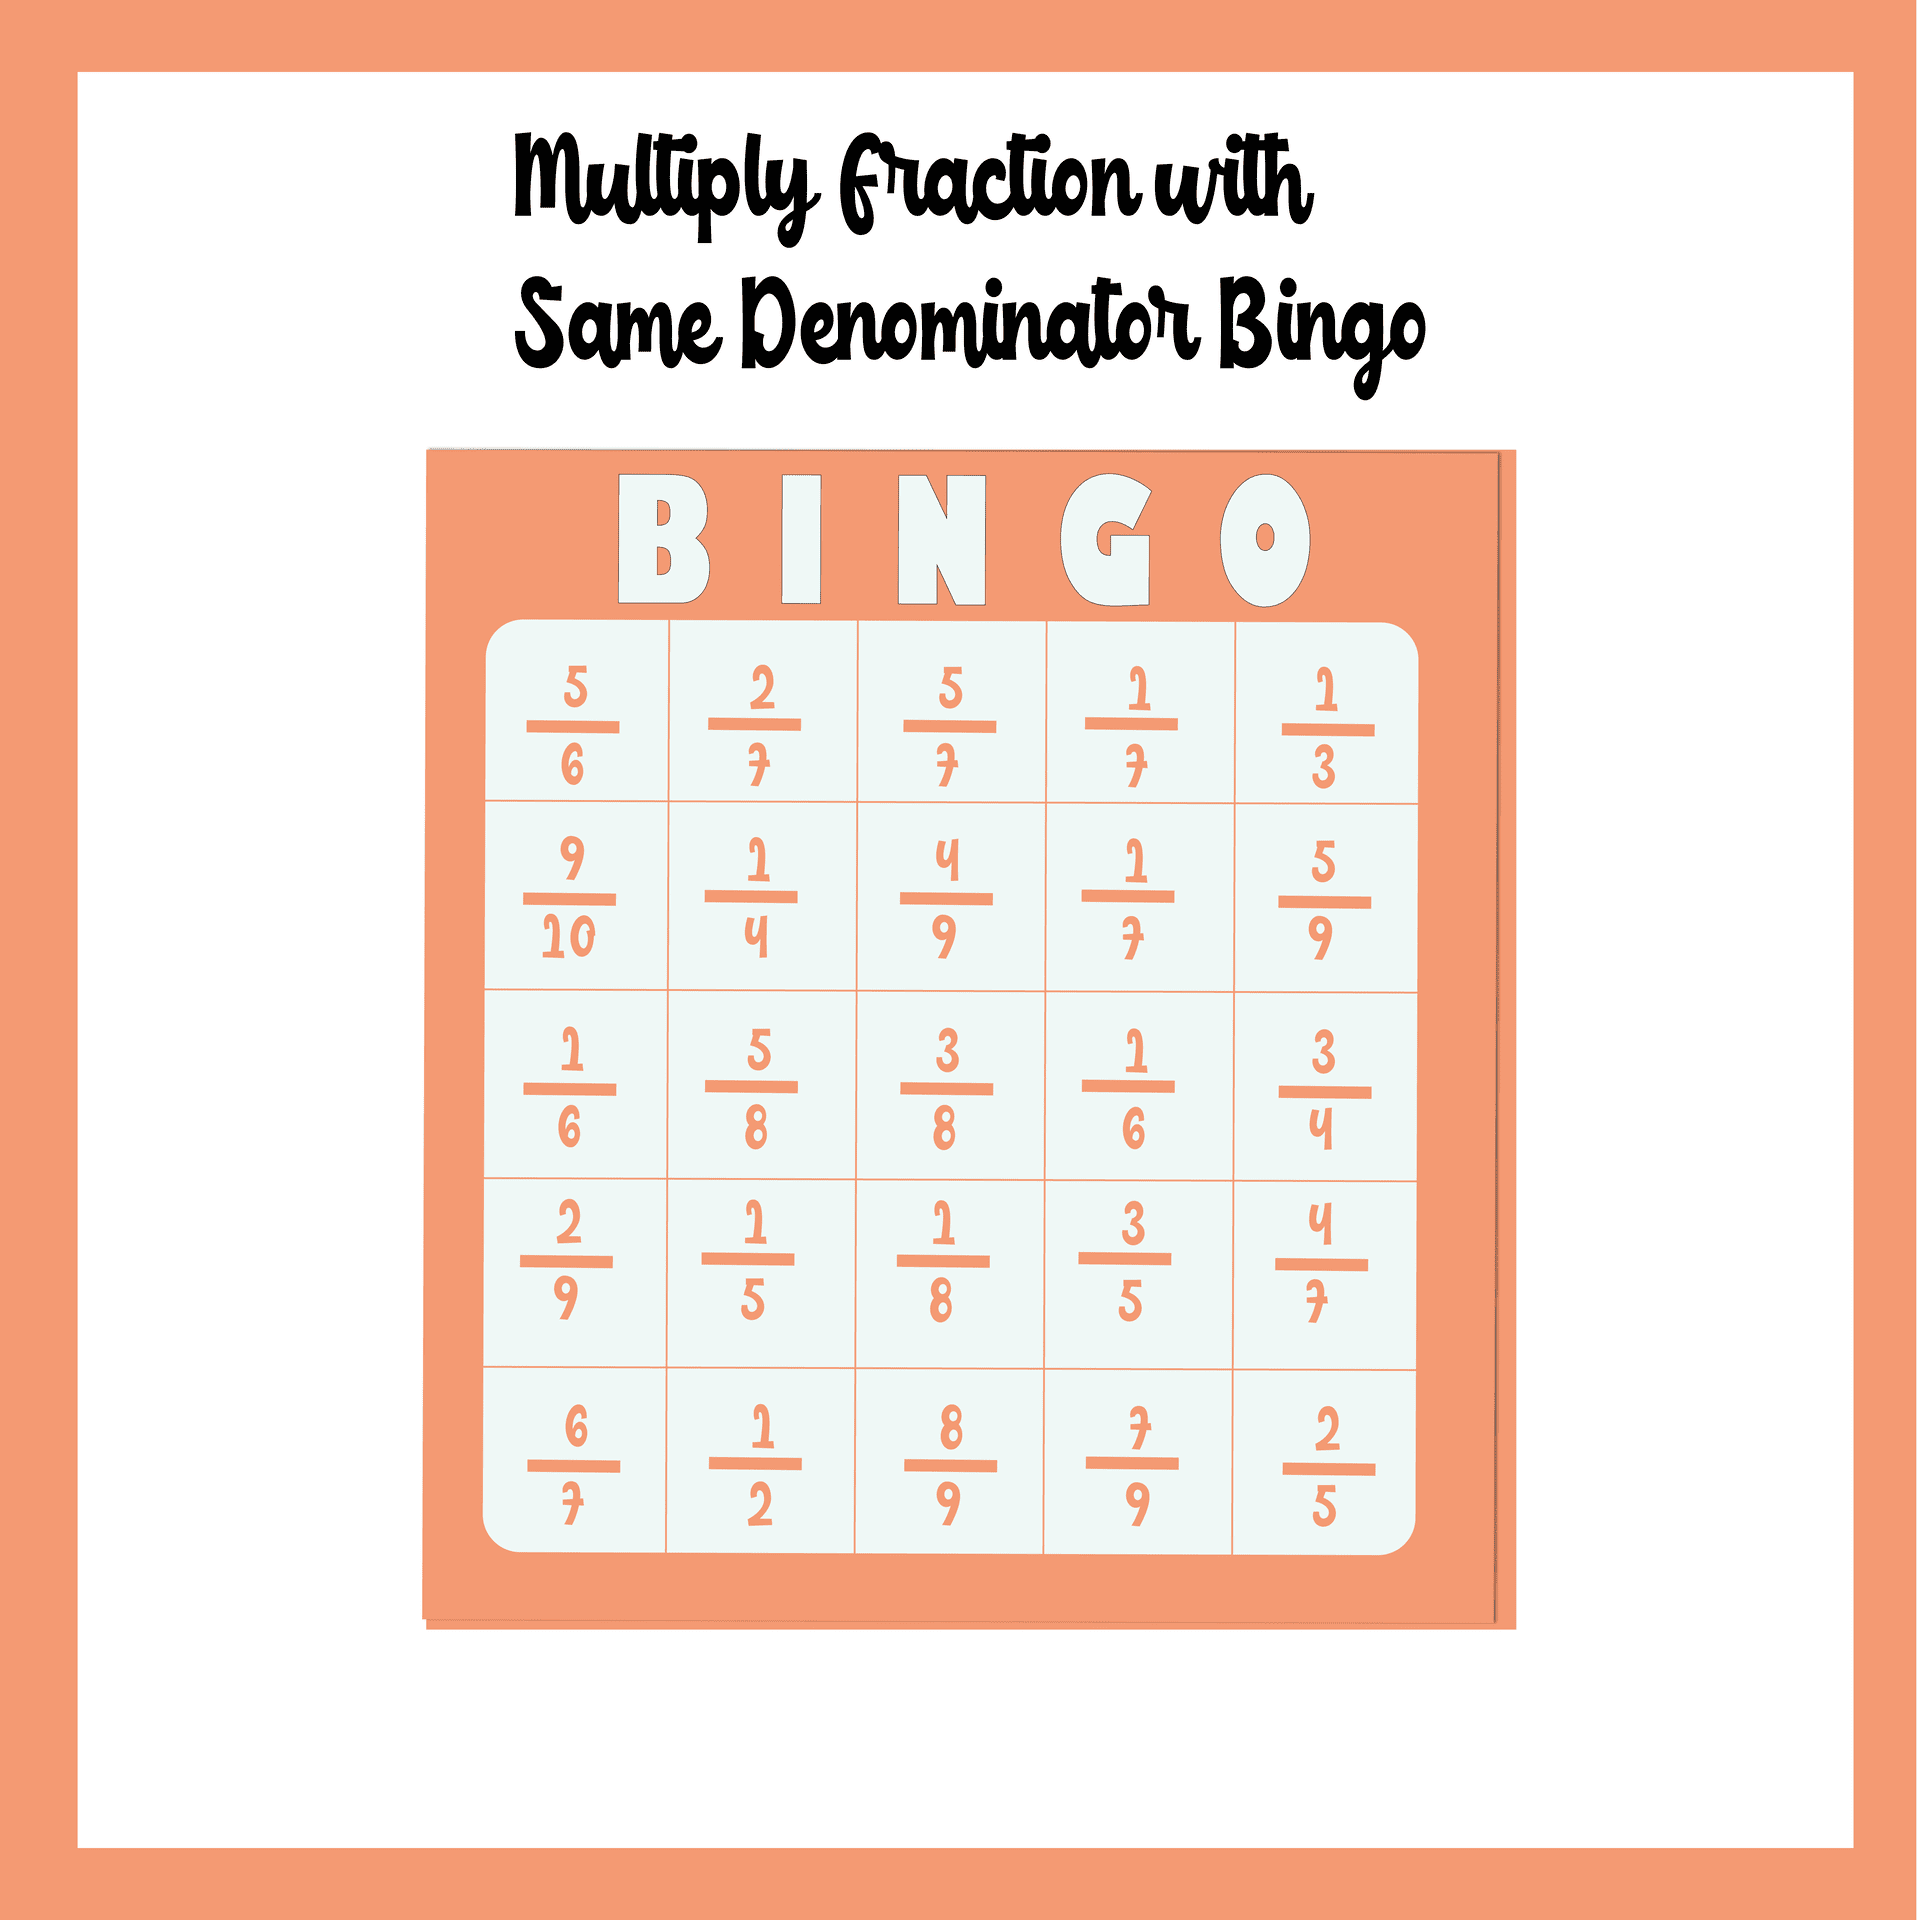 Playing bingo to describe Multiplying Fractions with Same Denominators Worksheets